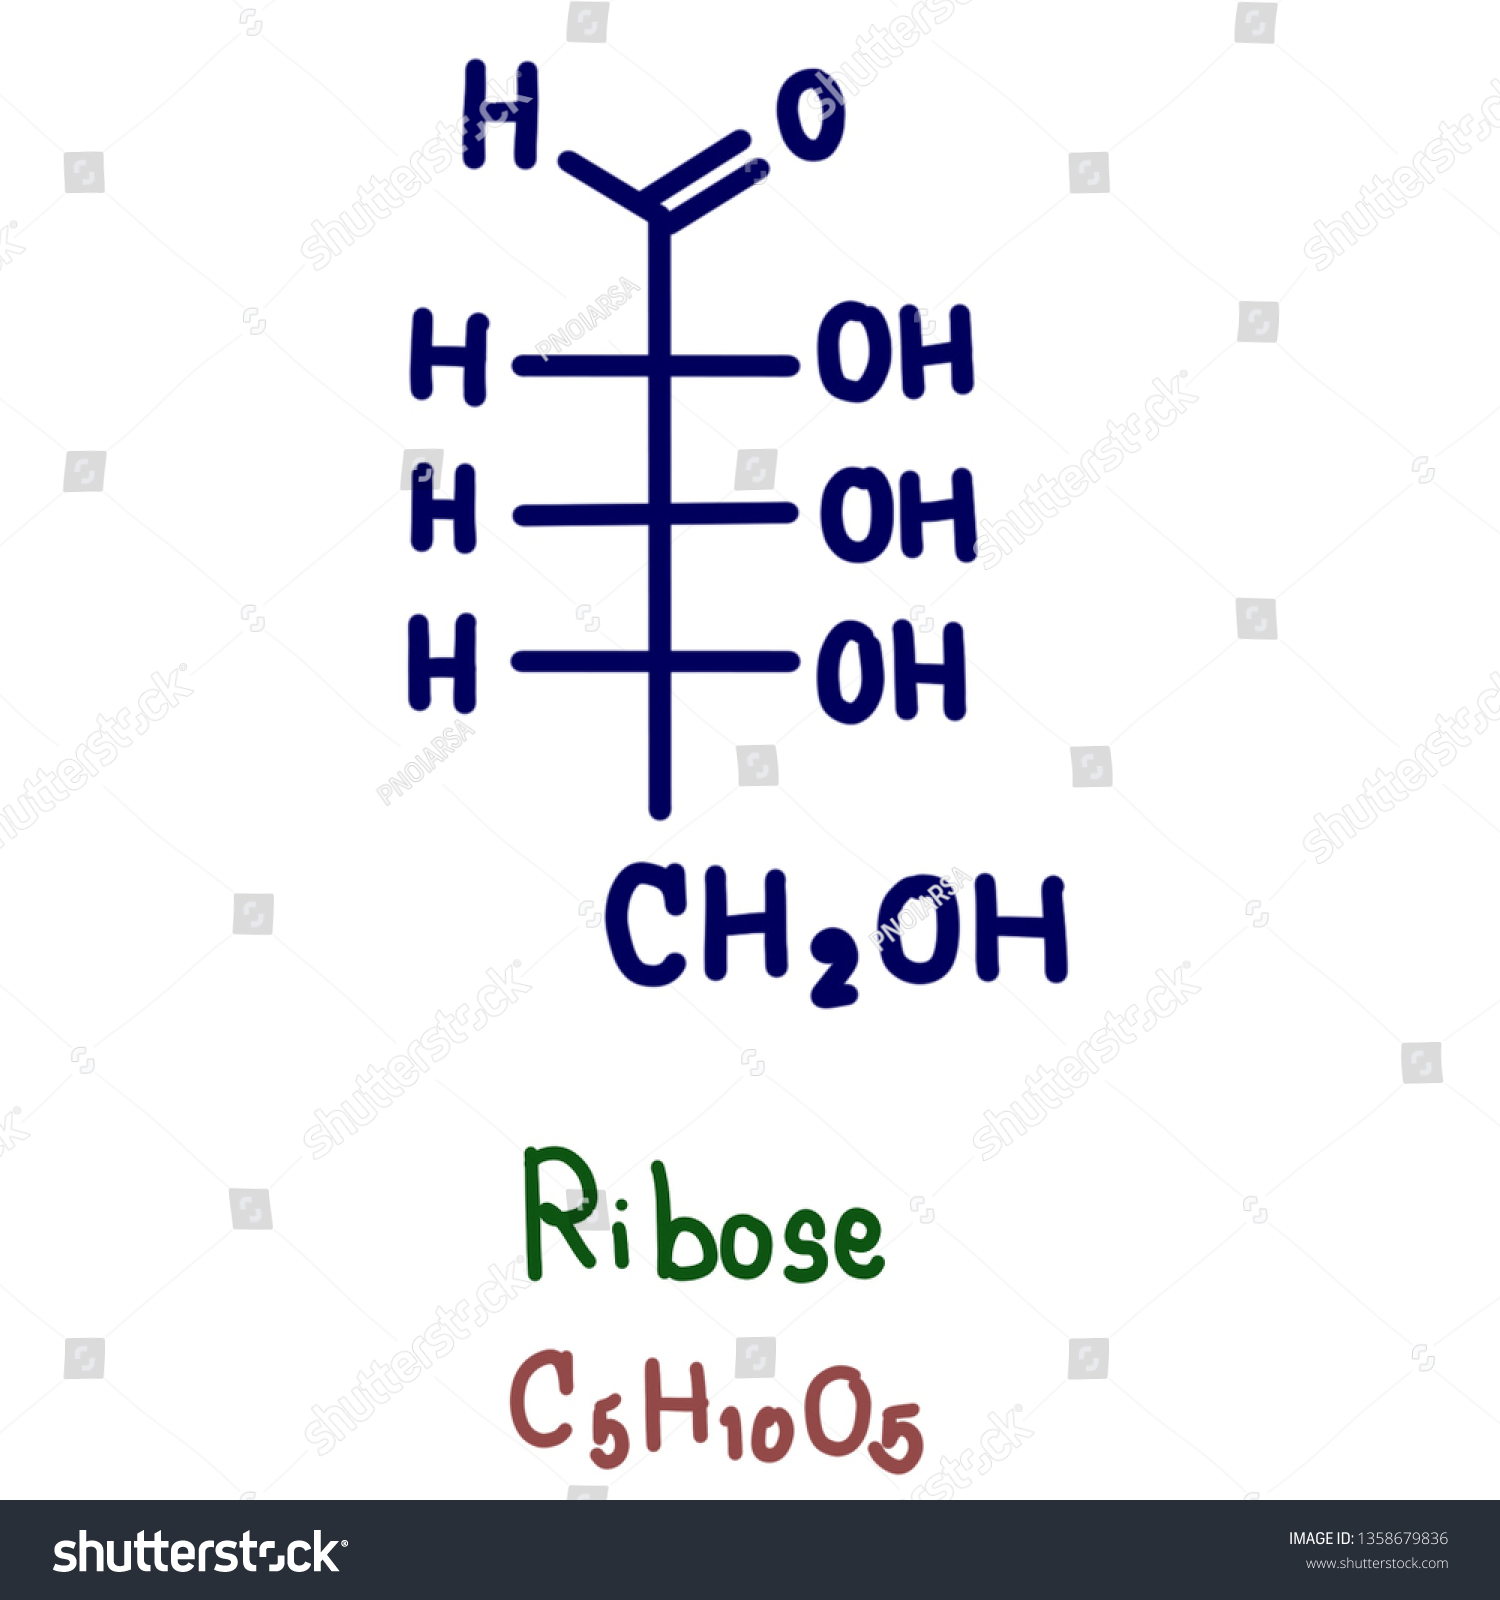 Ribose Carbohydrate Formula C5h10o5 Specifically Pentose Stock Illustration